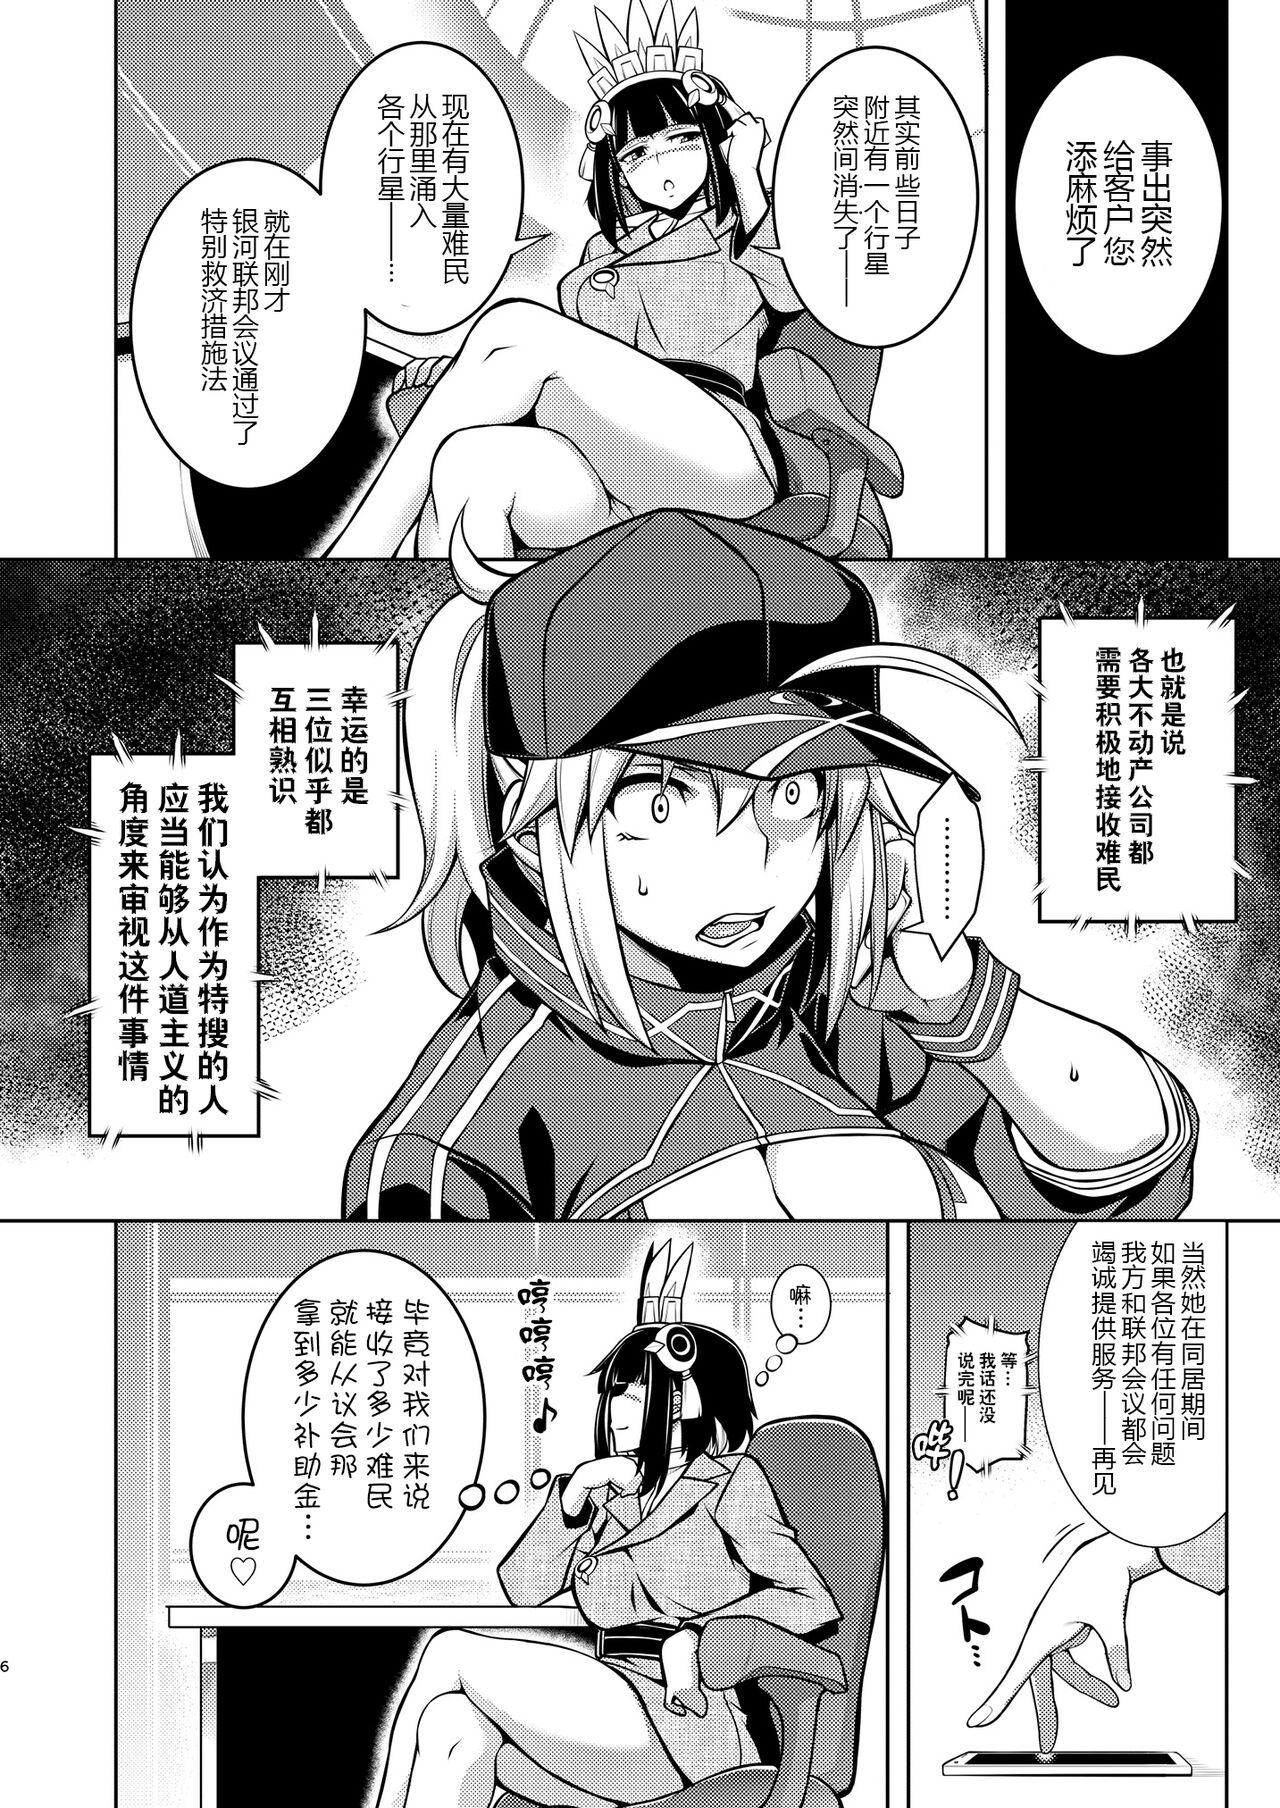 Mexican ONE ROOM - Fate grand order Mas - Page 7